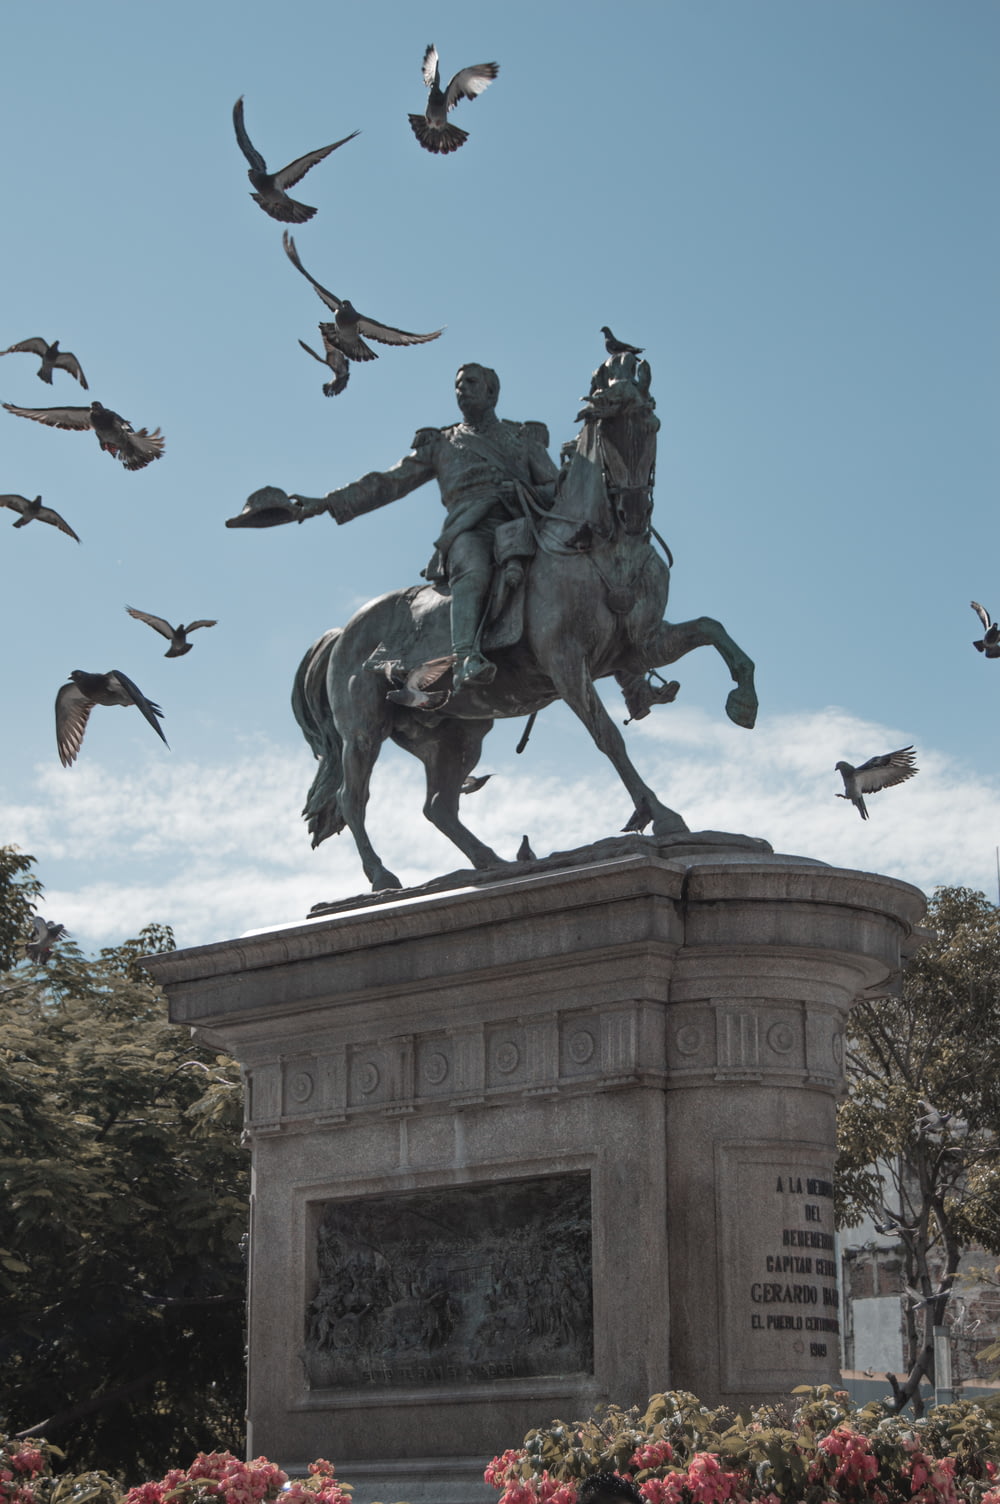 a statue of a man on a horse surrounded by birds